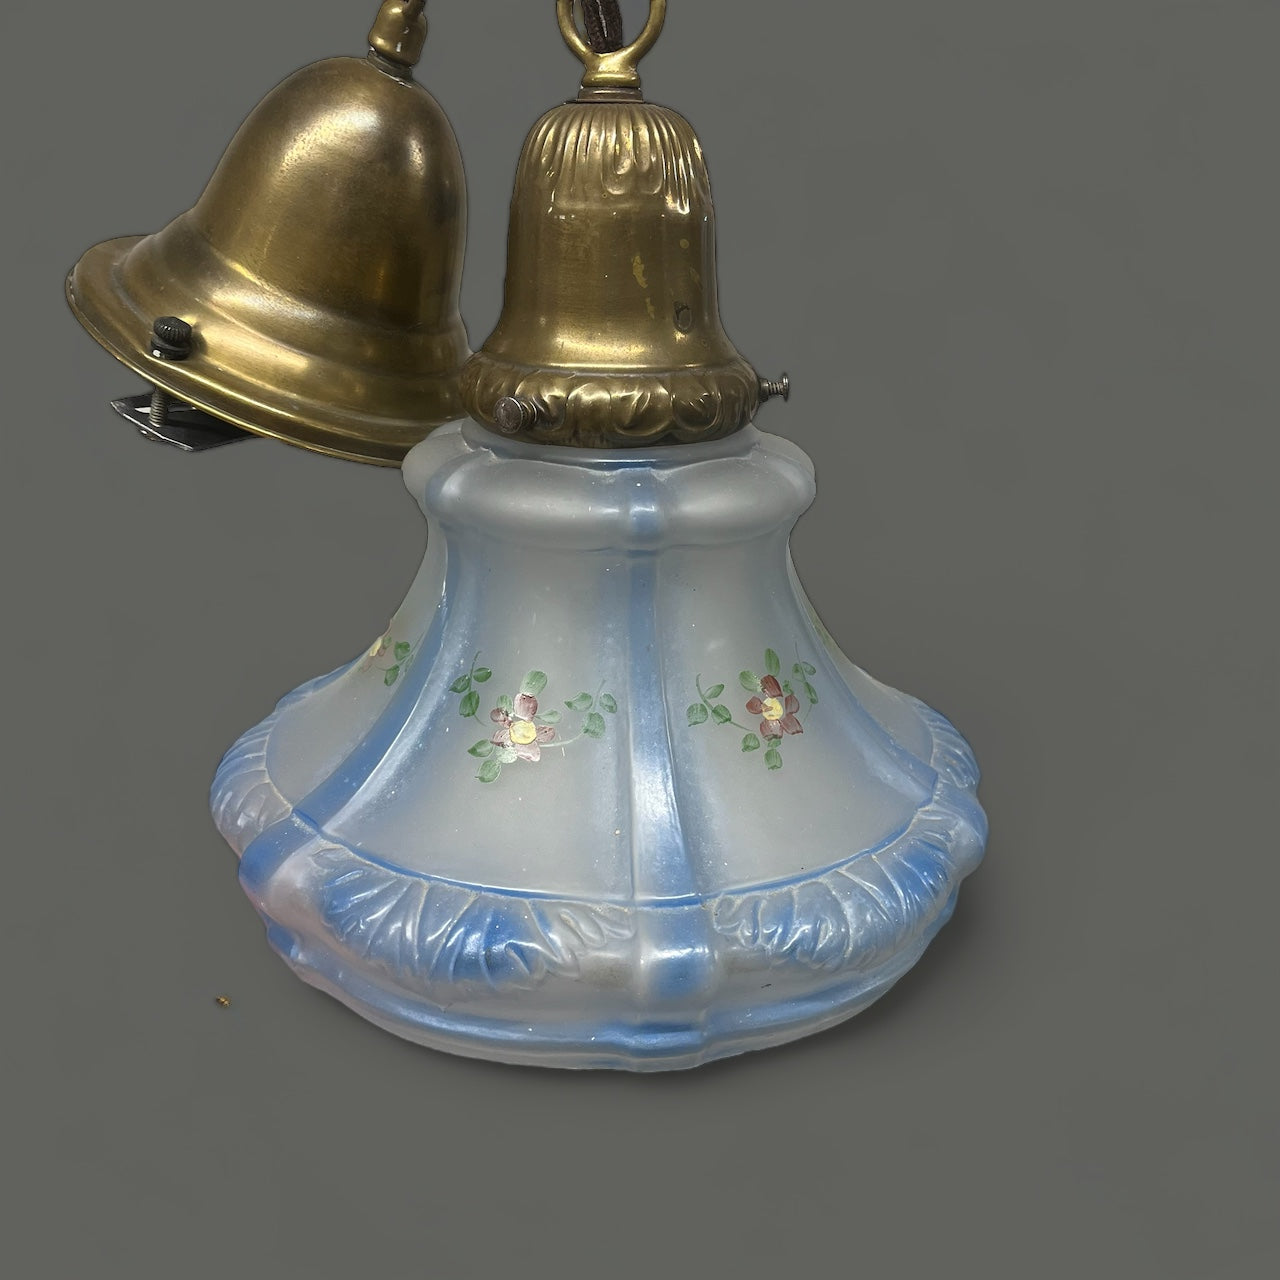 Antique Brass Pendant Light with Hand-Painted Frosted Blue Glass Shade - Rewired